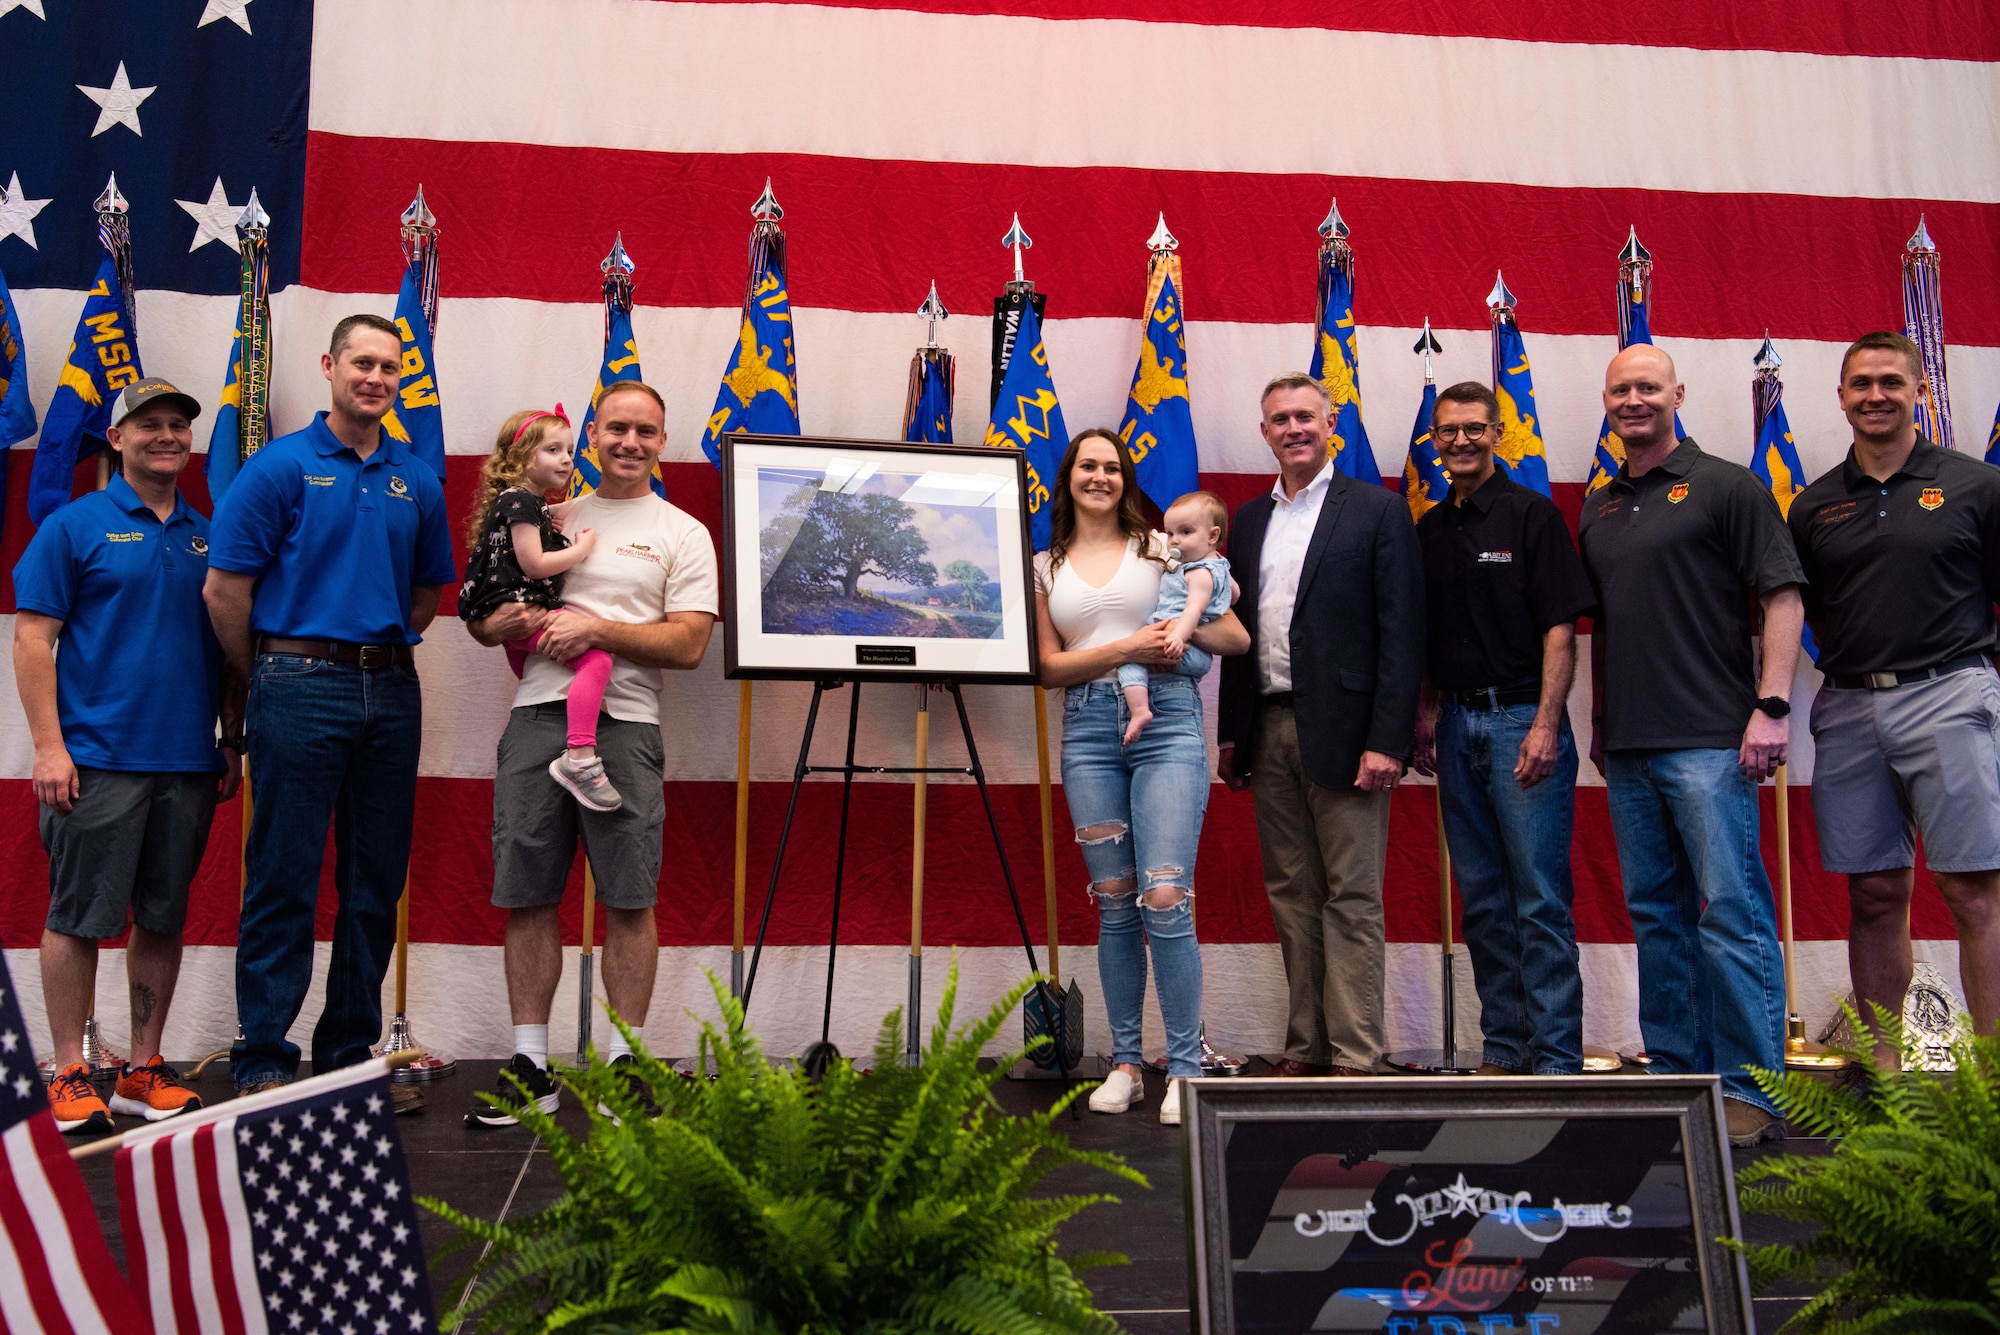 The Military Affairs Committee and 7th Bomb Wing leadership honor the Military Family of the Year at the World’s Largest BBQ hosted at the Abilene Convention Center in Abilene, Texas, April 15, 2023. The Abilene Military Affairs Committee hosted the 58th Annual World’s Largest BBQ honoring military personnel and their service. (U.S. Air Force photo by Airman 1st Class Alondra Cristobal Hernandez)